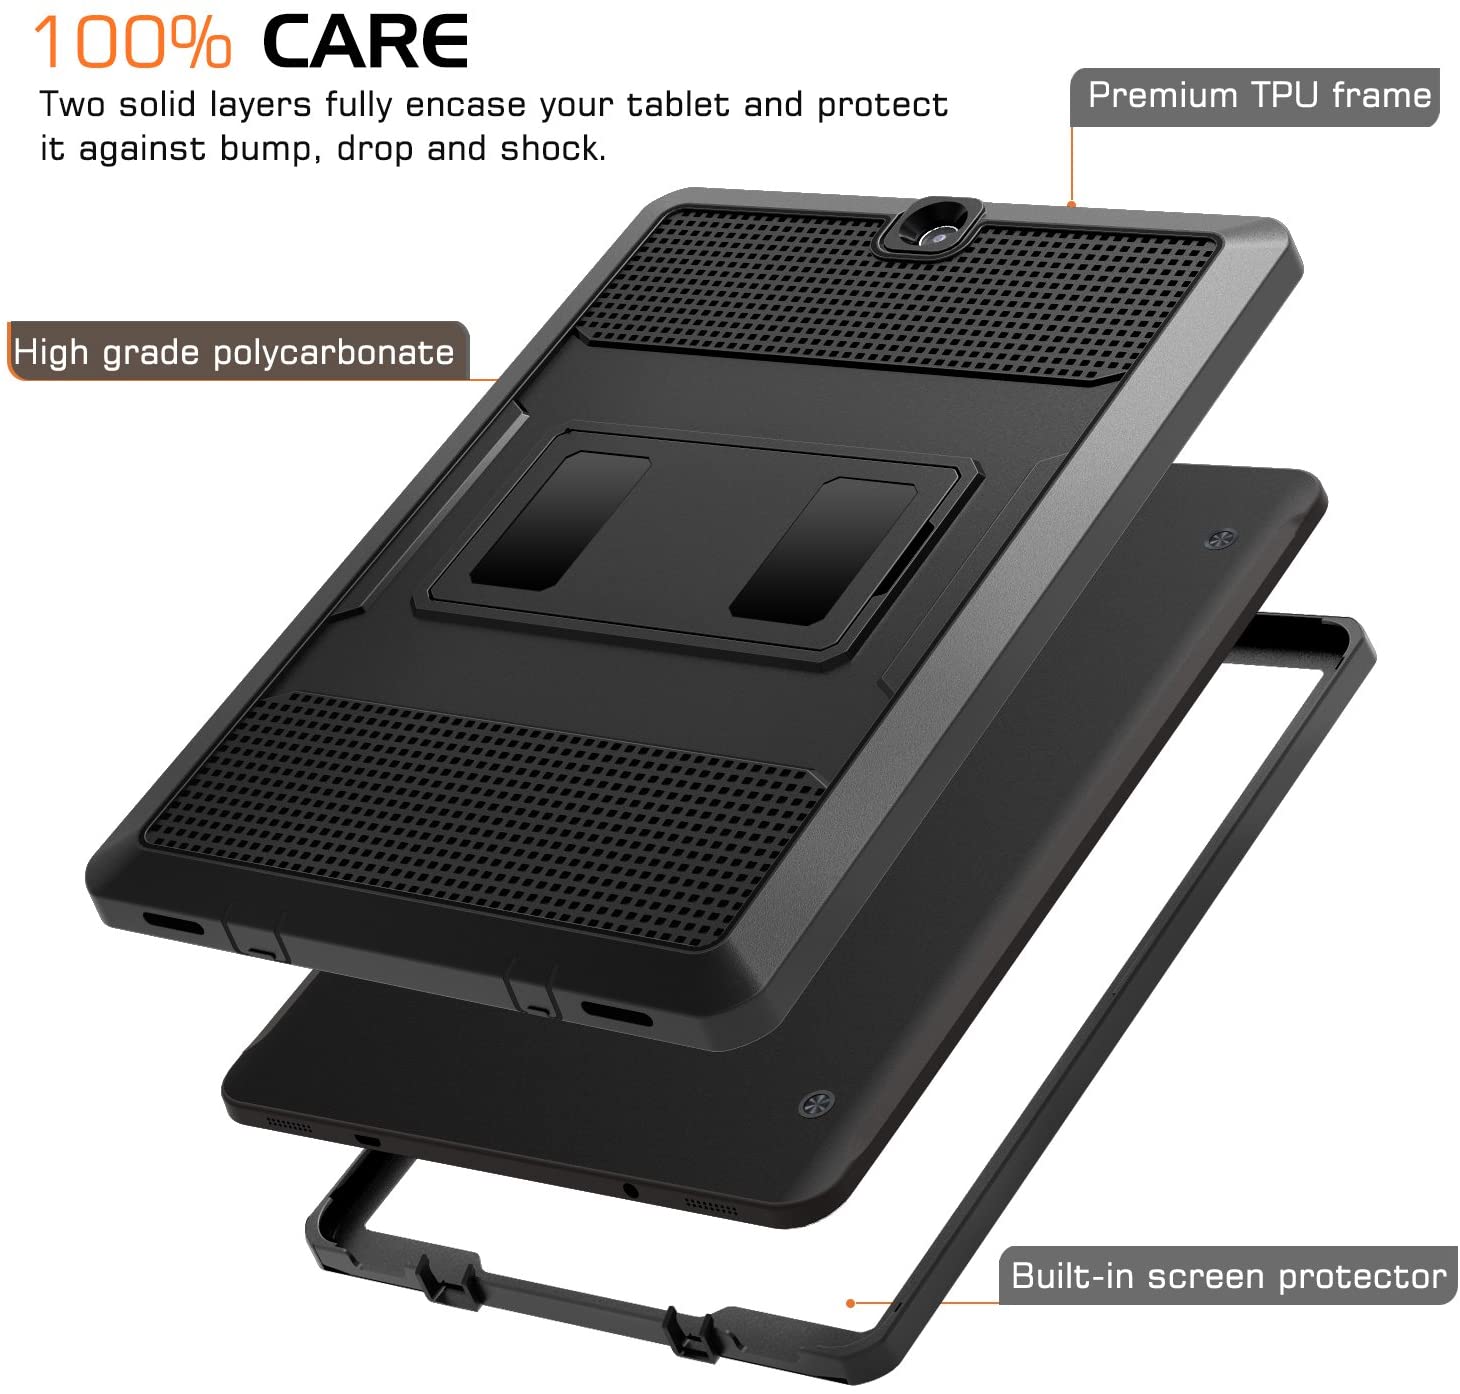 MoKo Tab S2 9.7 Case, [Heavy Duty] Shockproof Defender Full Body Rugged for Samsung Galaxy Tab S2 9.7/S2 Plus 9.7 LTE Android 6.0/7.0 2017 Version, Black. - e4cents